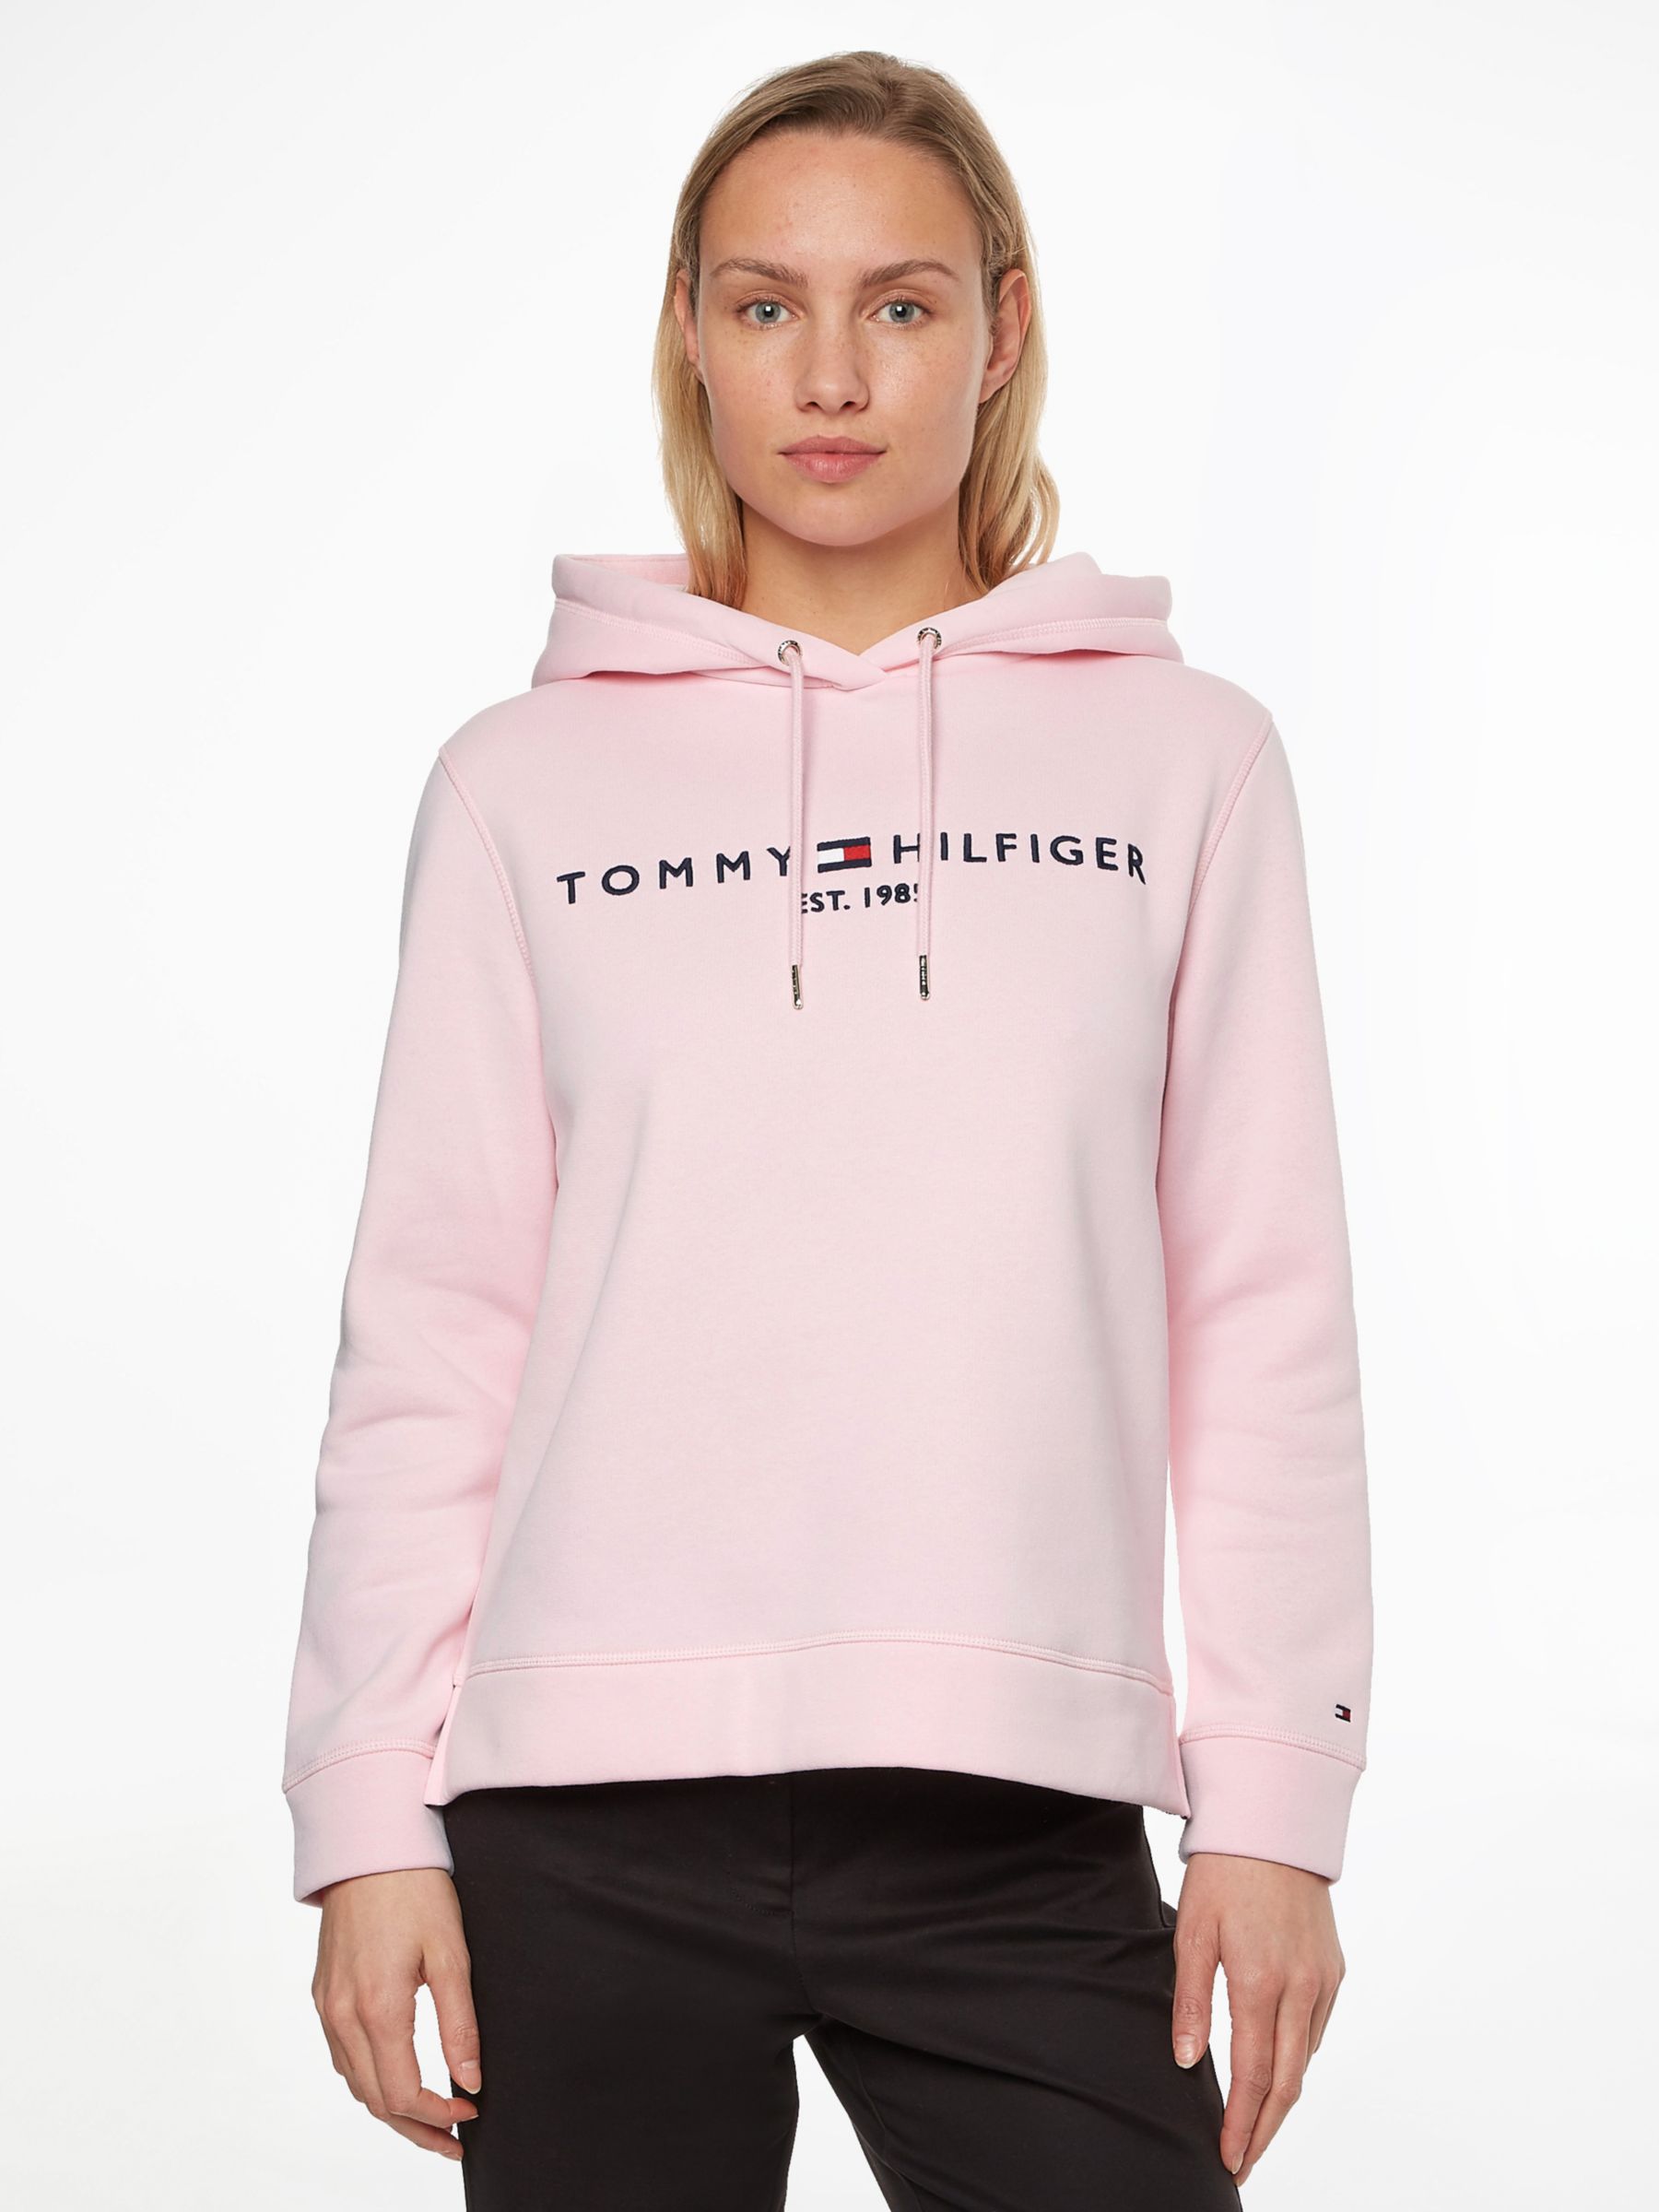 Tommy Hilfiger Cashmere Accessories Set, Pink, One Size